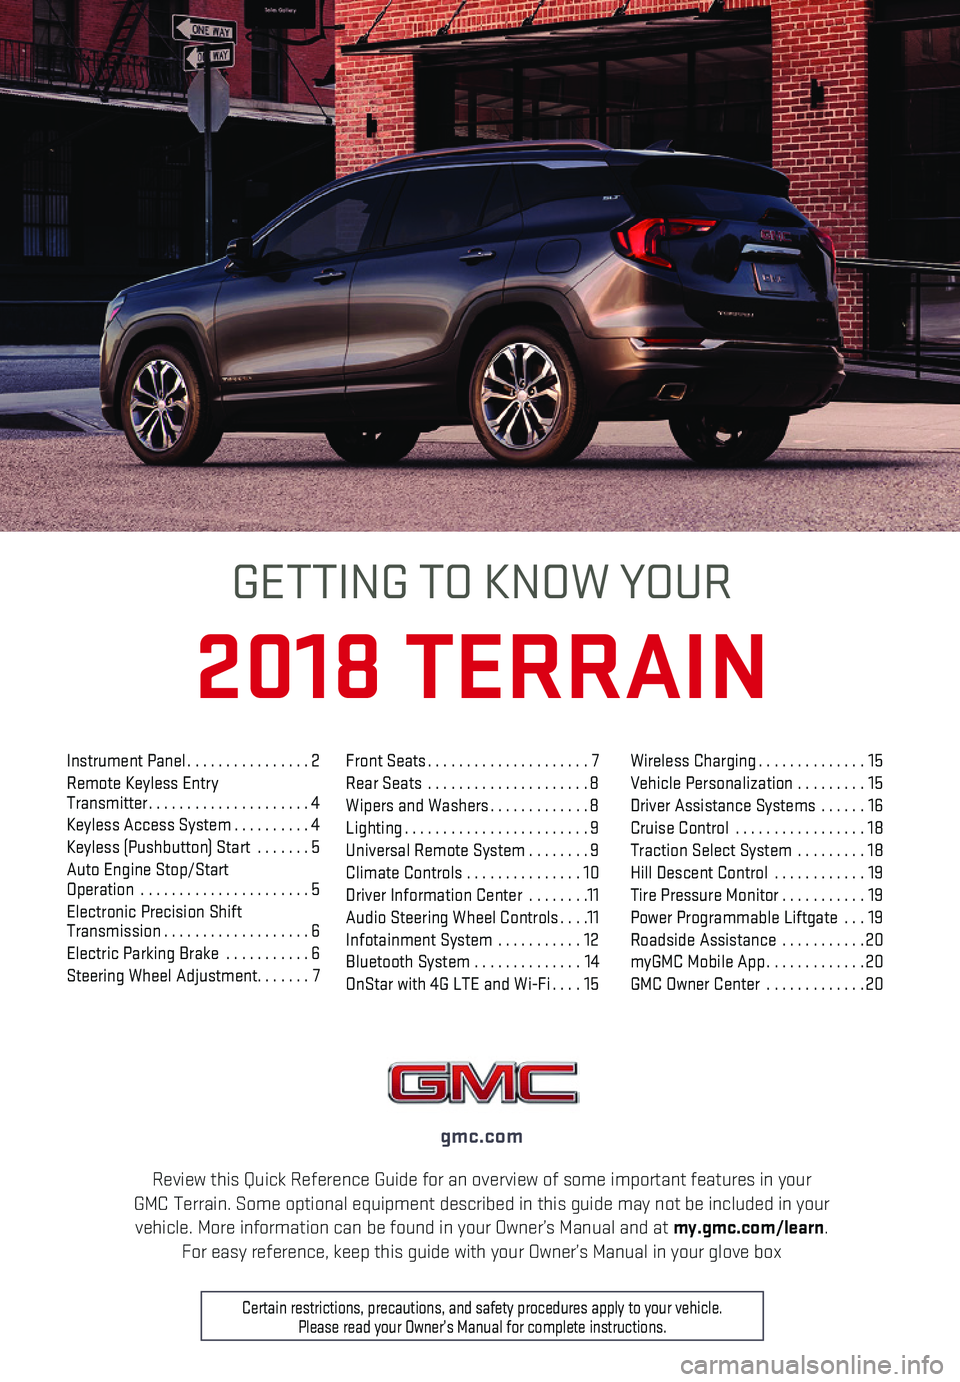 GMC TERRAIN 2018  Get To Know Guide 